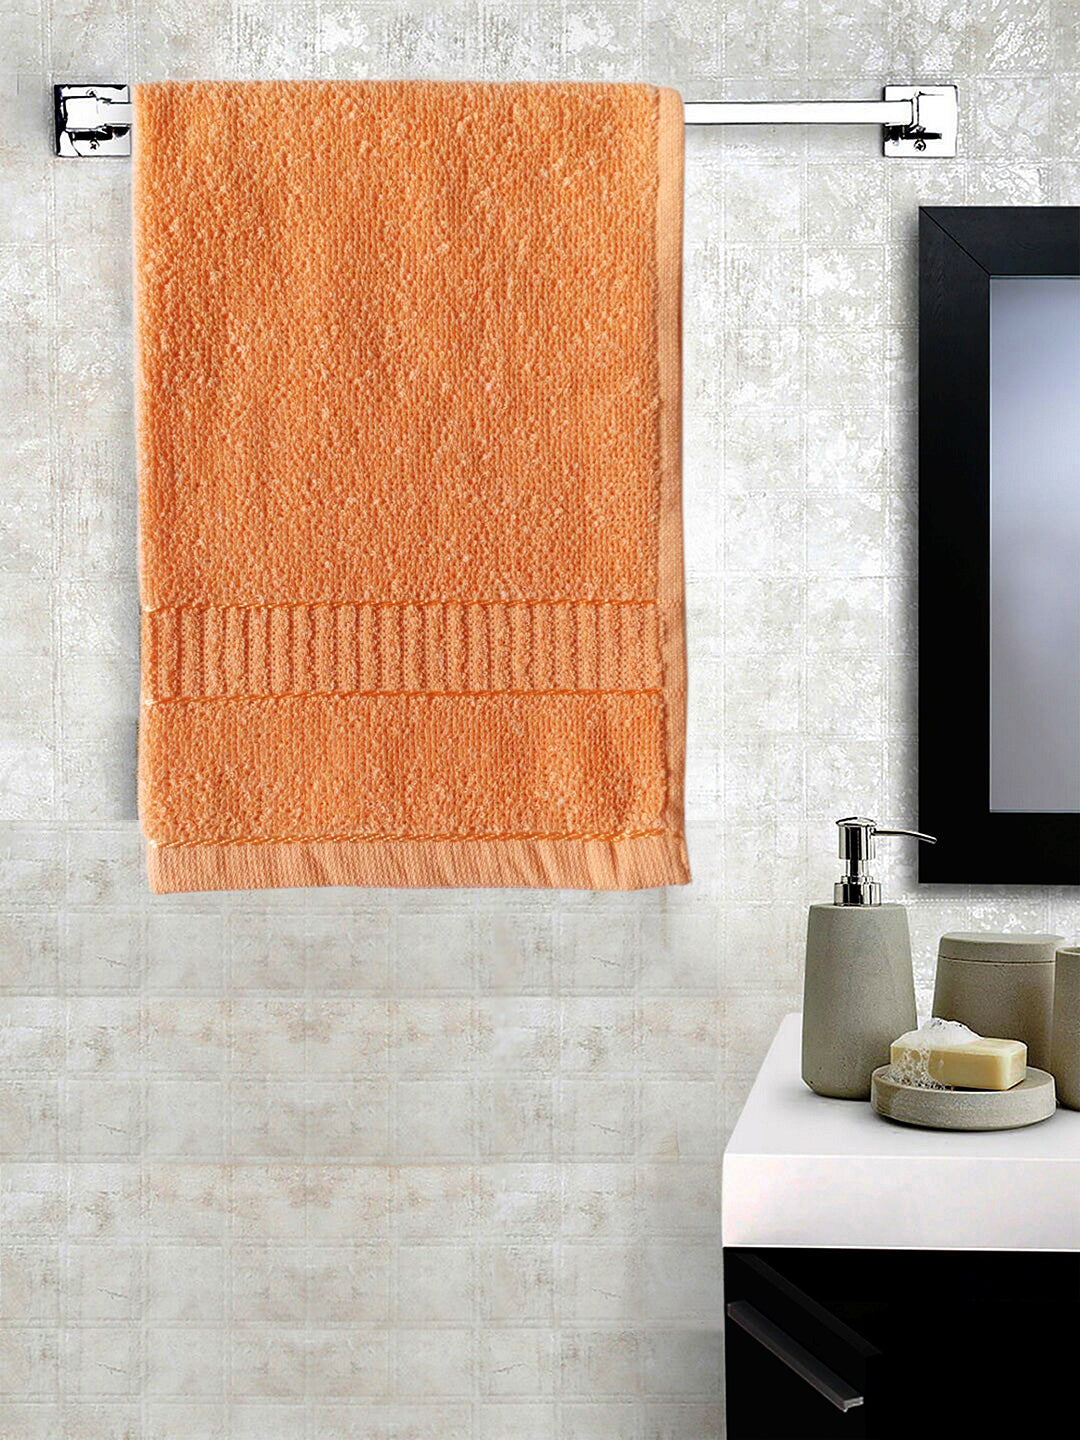 Orange Hand Towel Set of 6 Solid Popcorn Weave Plain Cotton Crepe Design with track Border, Soft Small Basic Size 35x50 cms, Premium 400 GSM Absorbant Towels by Lushomes